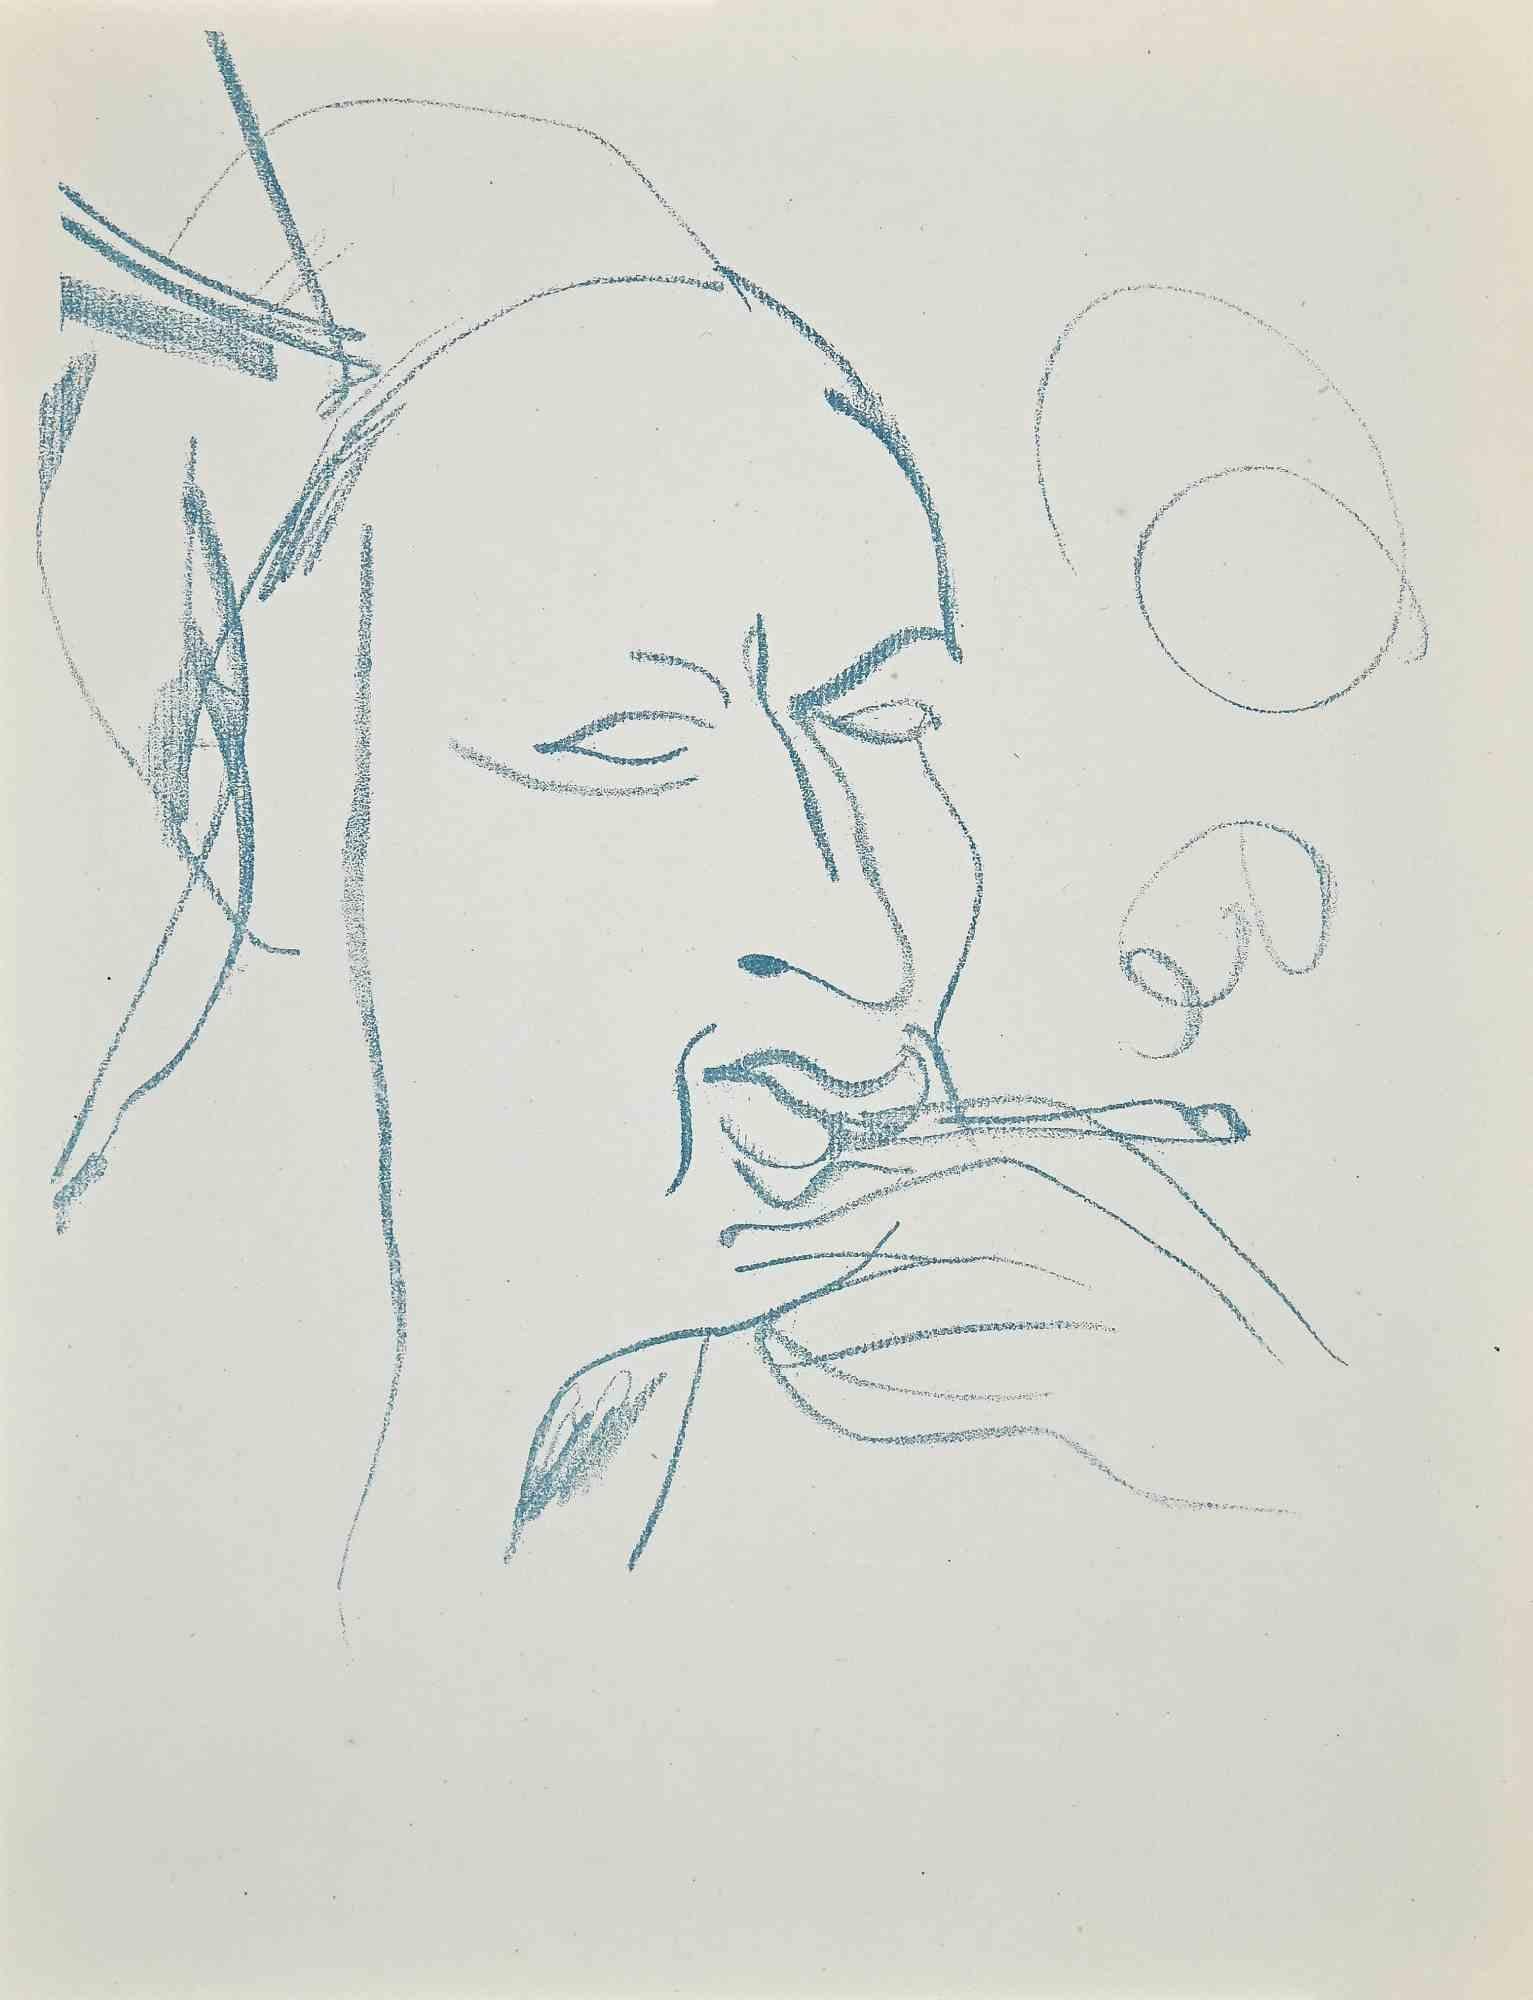 Study for Self-portrait is an original lithograph realized by Raoul Dufy in 1930s.

Good conditions.

No signature.

Raoul Dufy (3 June 1877 – 23 March 1953) was a French Fauvist painter, brother of Jean Dufy. He developed a colorful, decorative